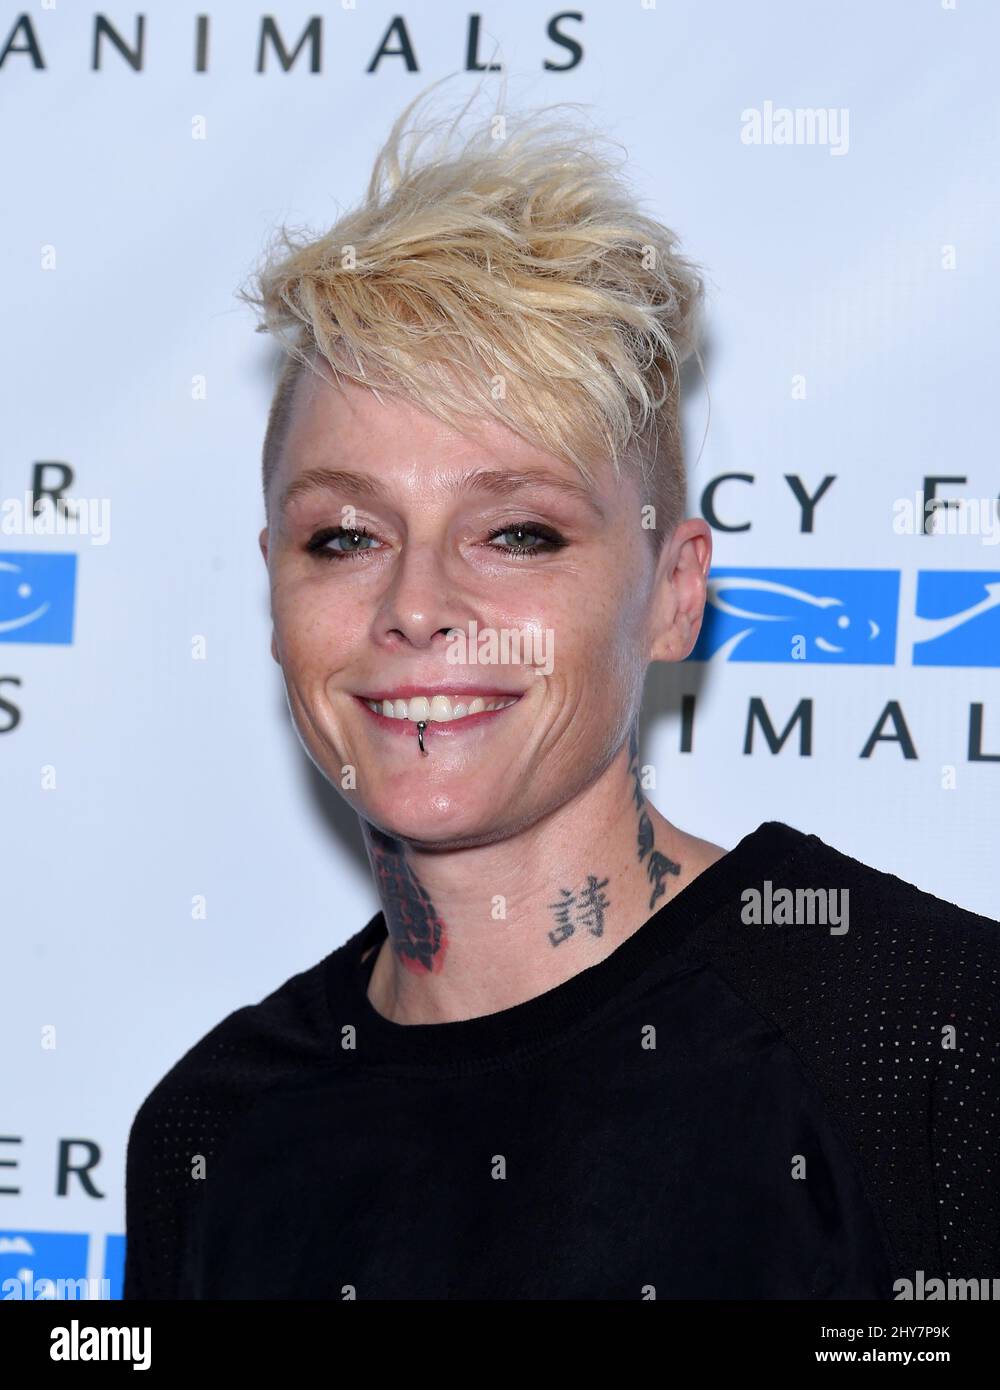 Otep Shamaya attents Mercy for Animals presents 'Hidden Heroes' Gala held at the Unici Casa. Stock Photo